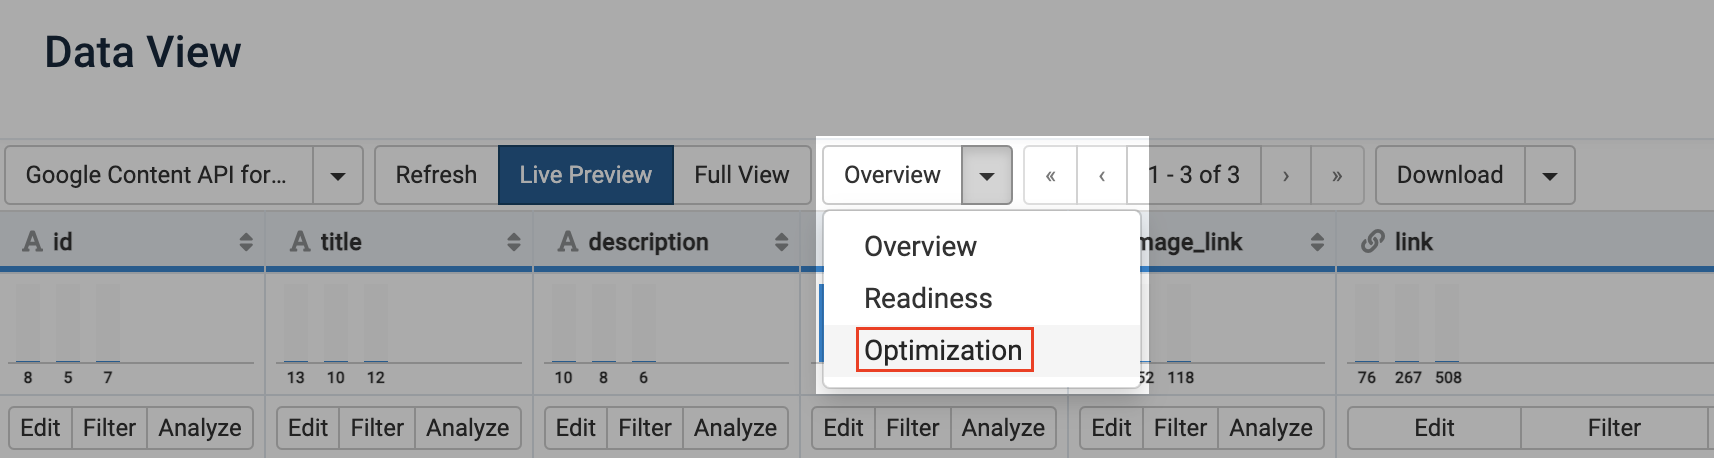 Open the Overview drop-down menu to select Optimization and access the Channel optimization view